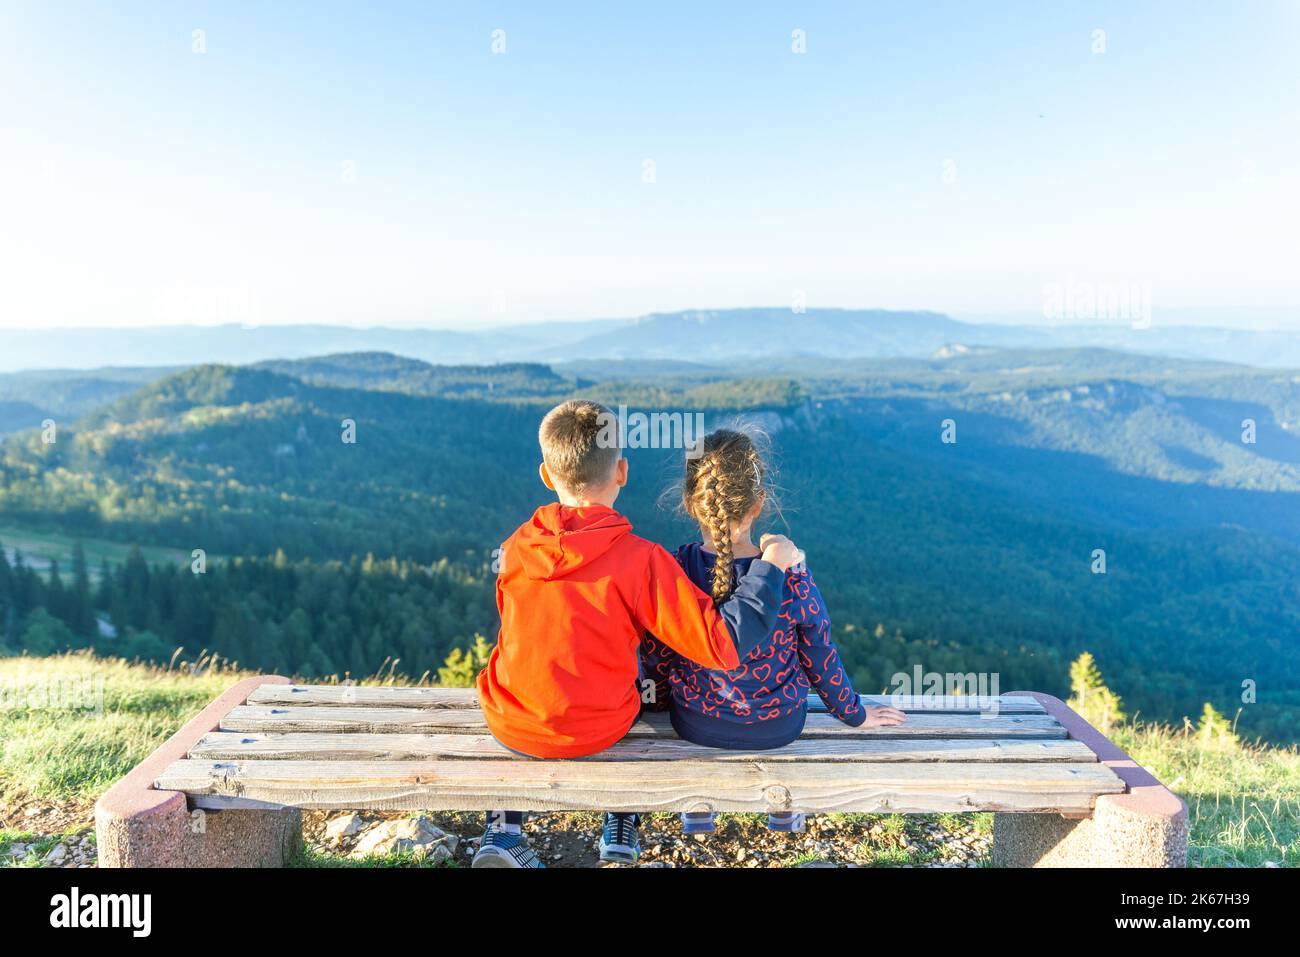 Sister and brother are hugging on a bench with a view of the mountain valley. Concept of family love, friendship, protection and care Stock Photo